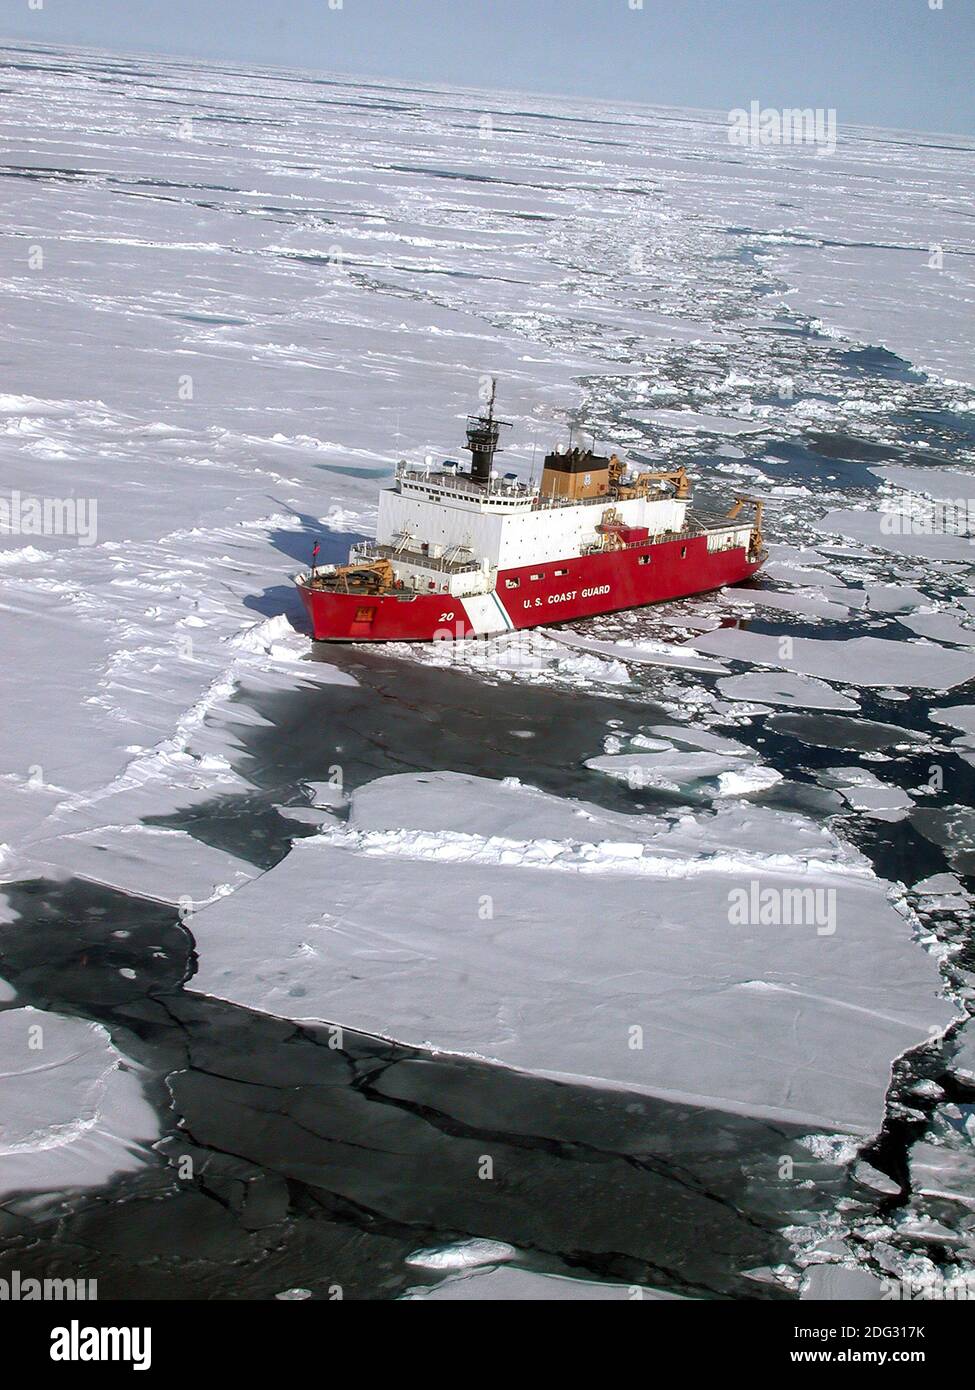 Coast Guard cutter Healy cuts path through ice The Coast Guard cutter Healy cuts a path through the Antarctic ice. The Healy is the newest and most technologically advanced U.S. icebreaker.  The Healy is designed to conduct a wide range of research activities, providing more than 4,200 square feet of scientific laboratory space, numerous electronic sensor systems, oceanographic winches and accommodations for up to 50 scientists. It can break 4.5 feet of ice continuously at three knots and can operate in temperatures as low as -50 degrees Fahrenheit. Stock Photo